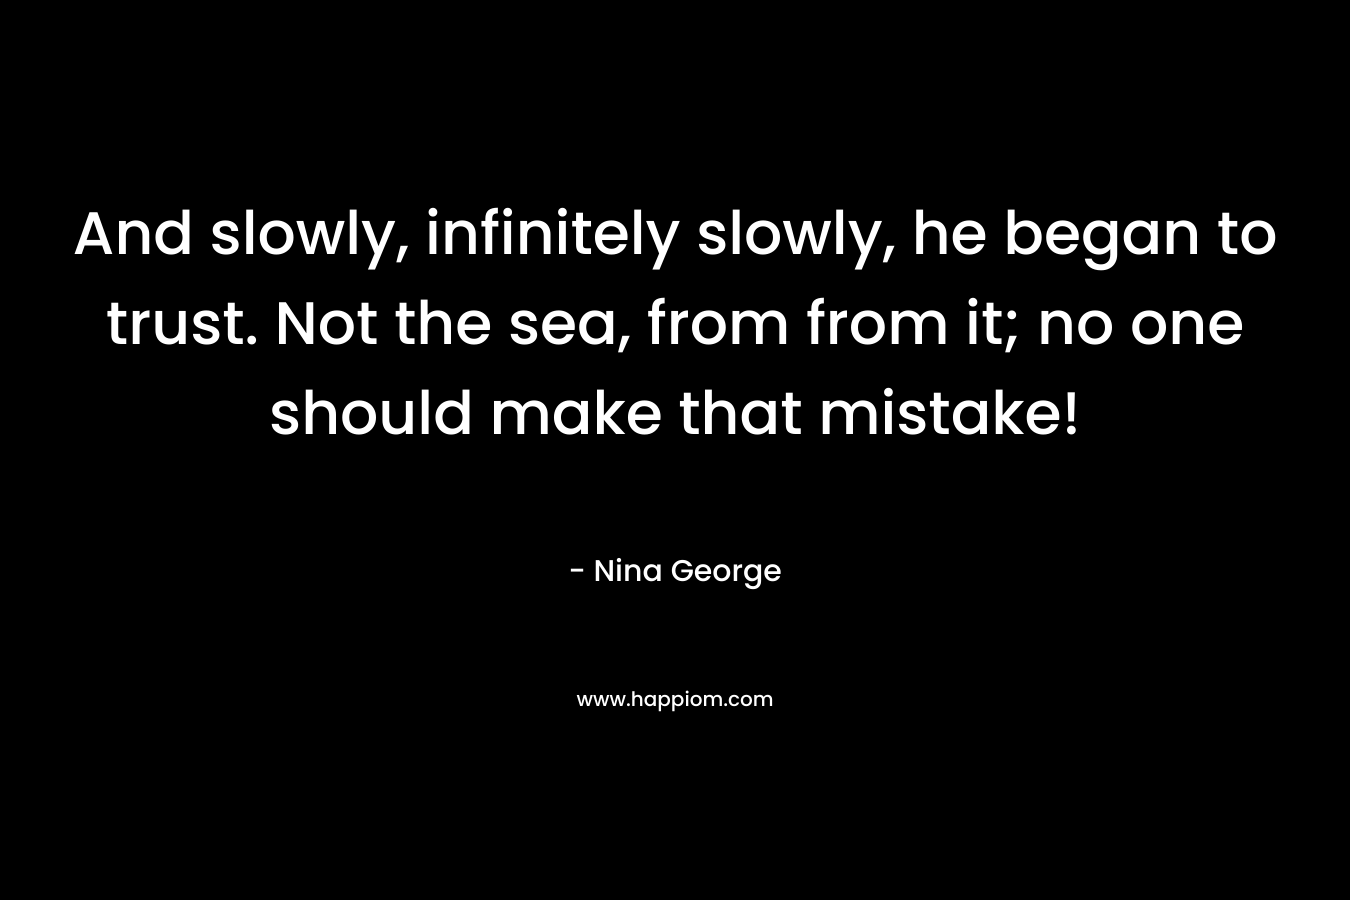 And slowly, infinitely slowly, he began to trust. Not the sea, from from it; no one should make that mistake!